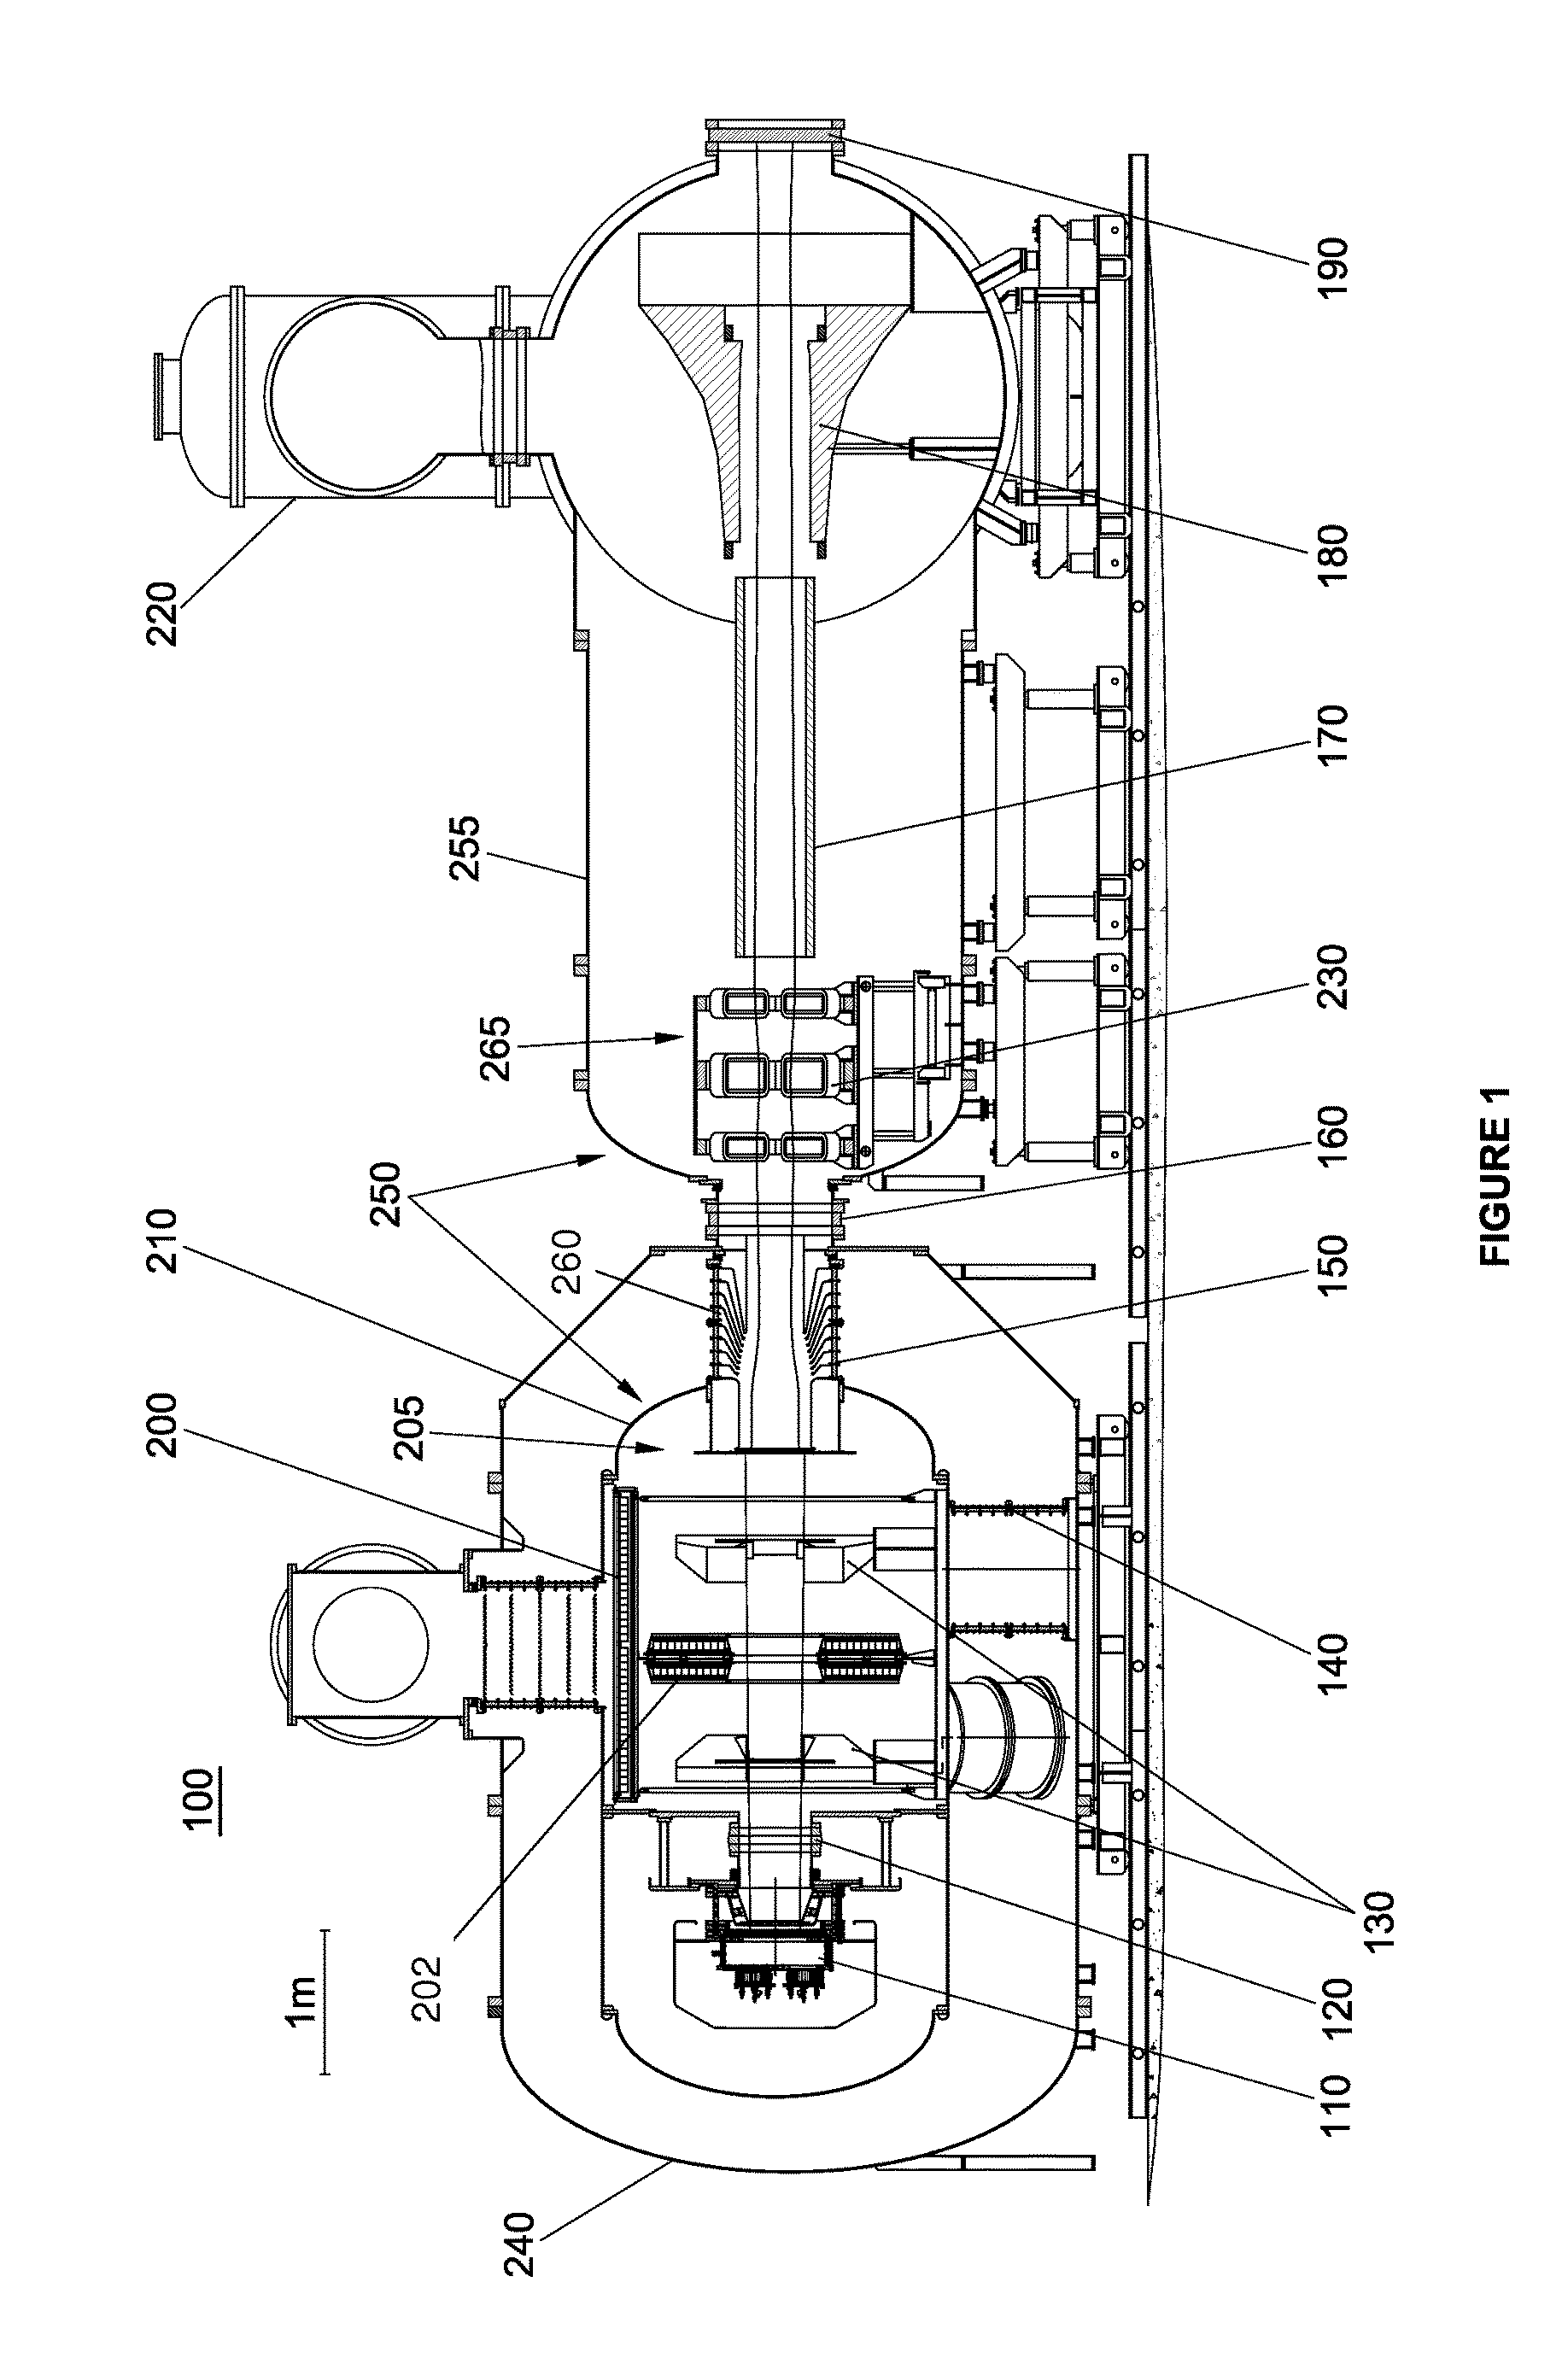 Negative ion-based neutral beam injector